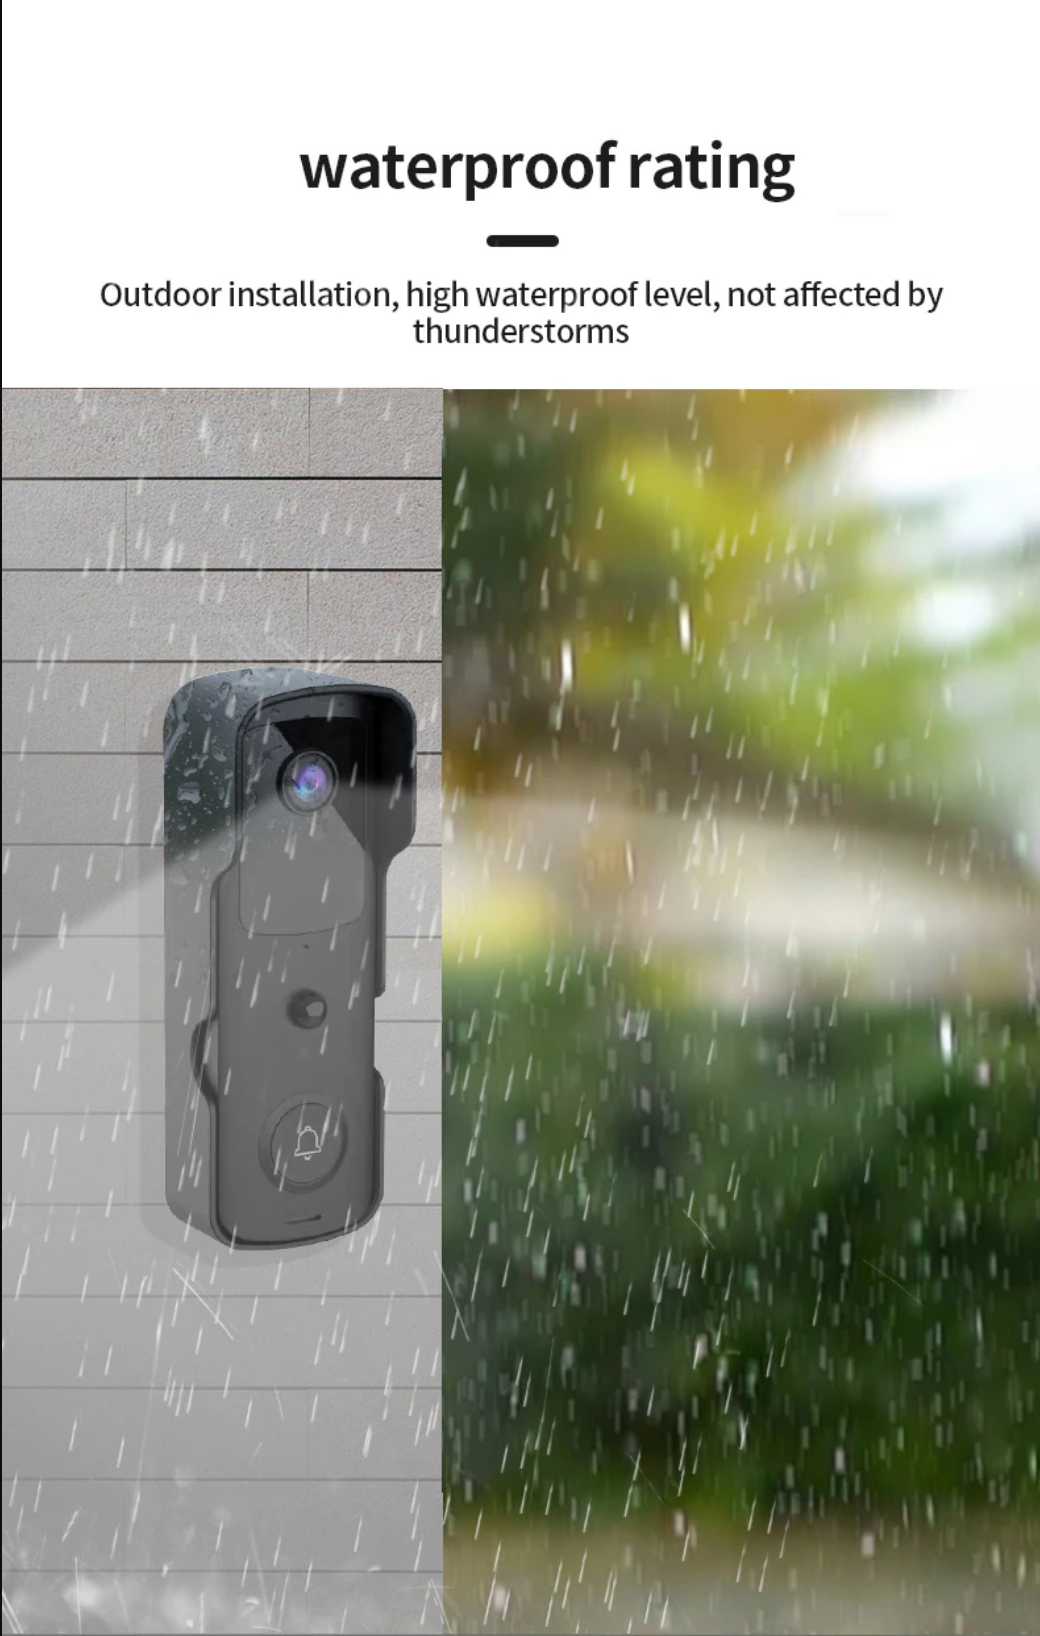 P - Tuya Smart Phone App 1080P WiFi Video Smart Wireless Doorbell With Chime And Rechargeable Batteries For Phone Home Security